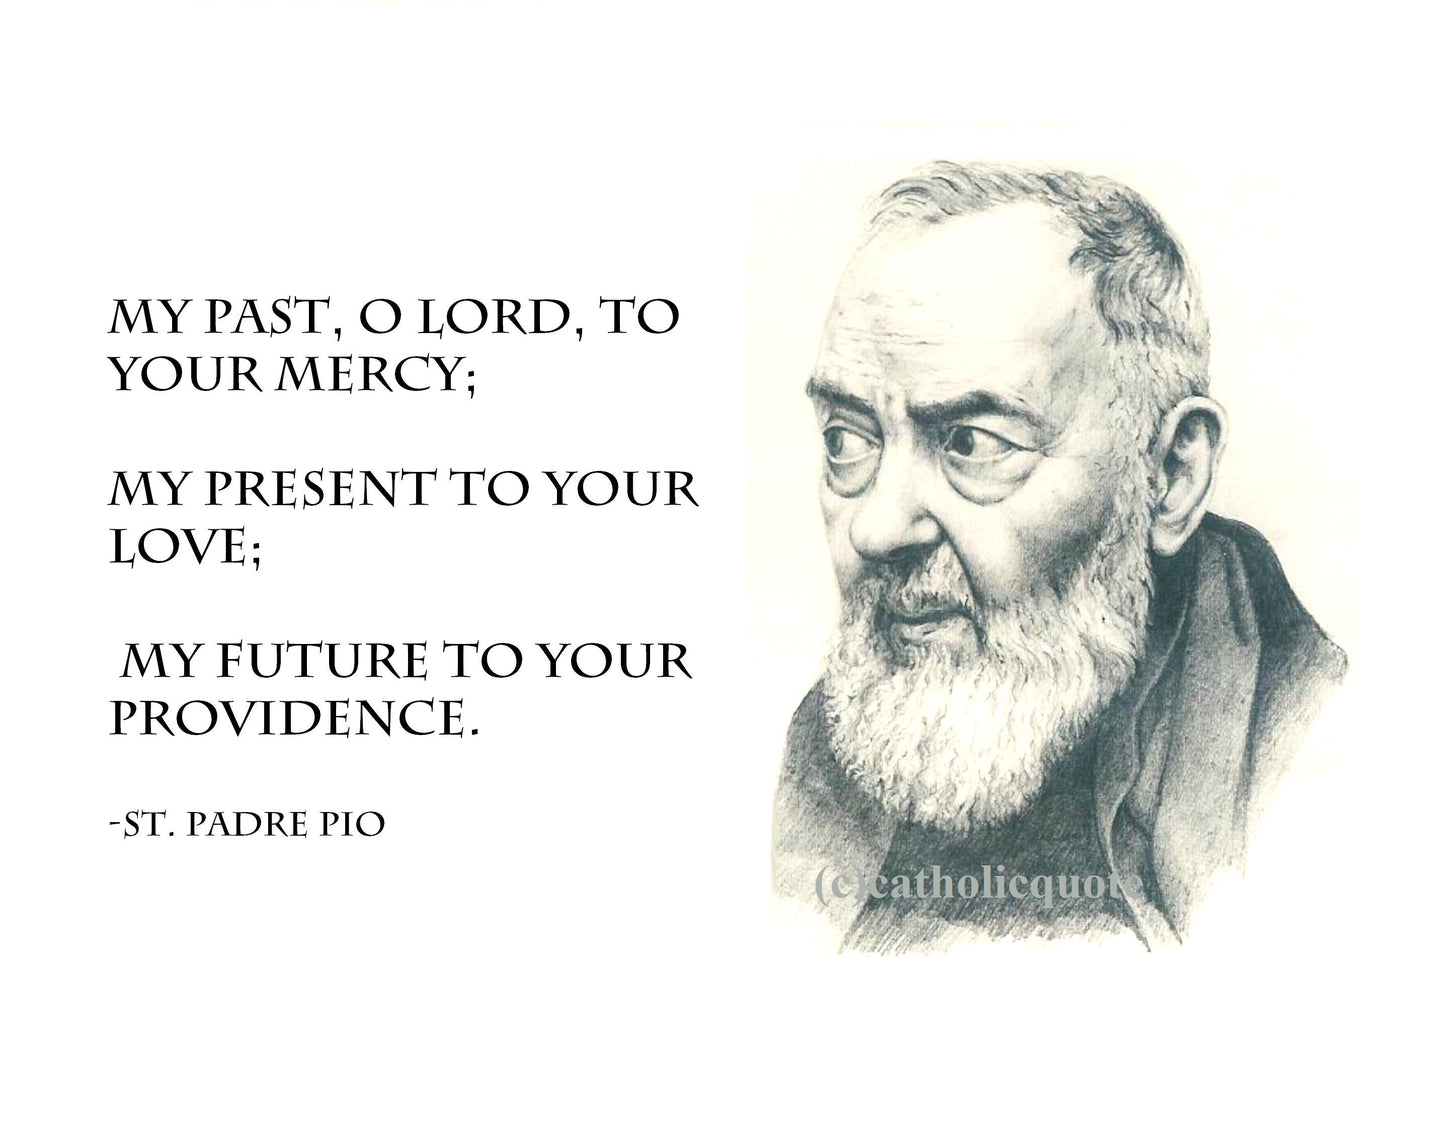 St. Padre Pio de Pietrelcina Quote – My past oh Lord to your mercy – 8.5x11" – Catholic Art Print – Archival Quality– Authentic Quote